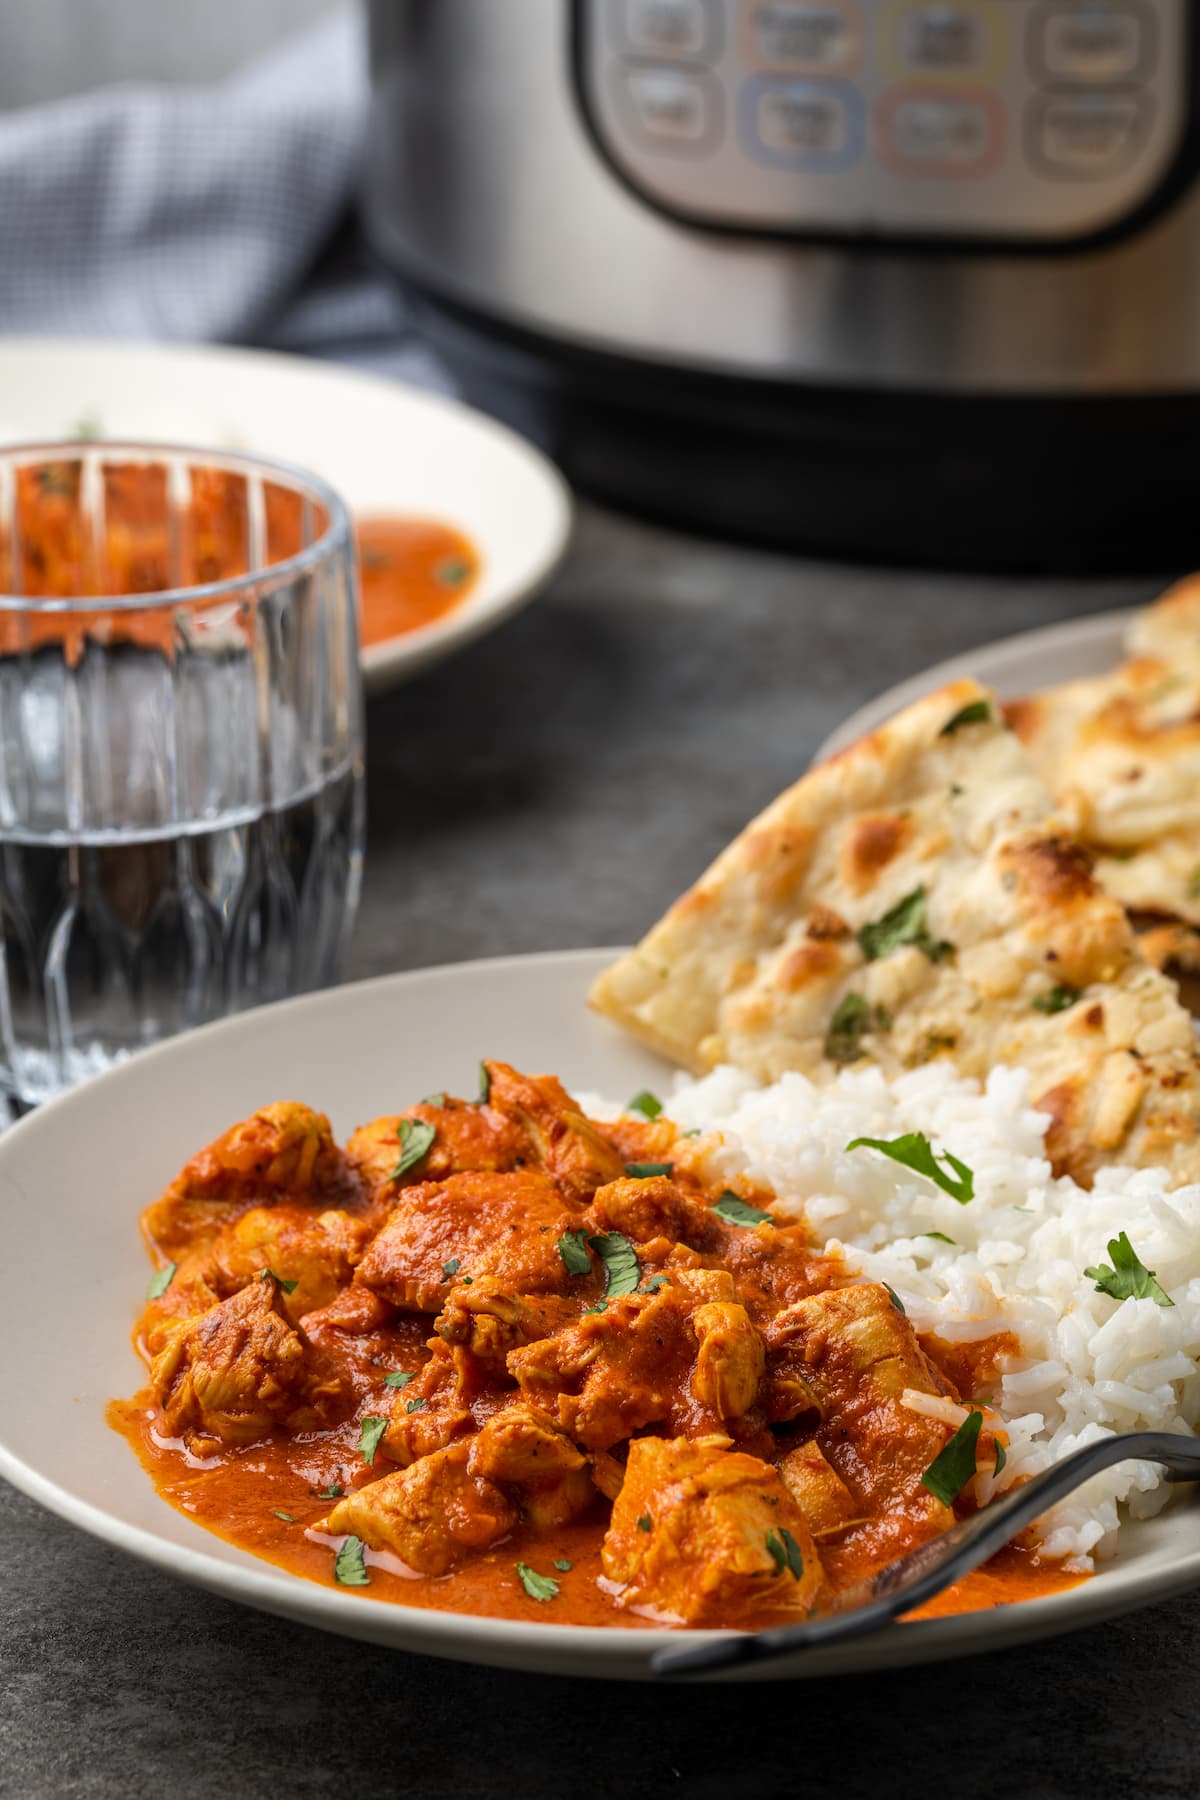 Instant pot butter chicken served on a plate next to a side of basmati rice and naan, with the instant pot in the background.